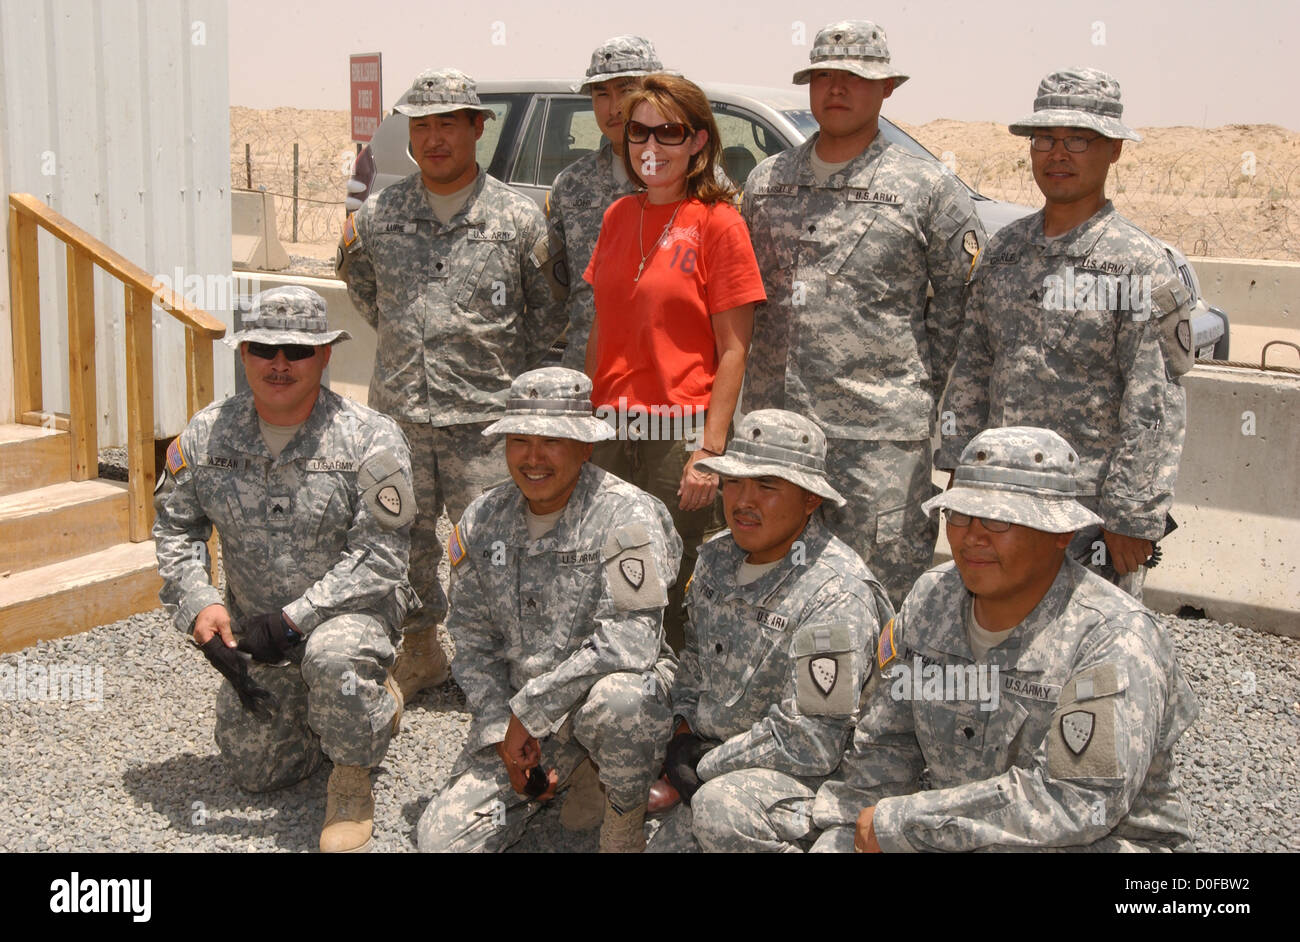 Governor Sarah Palin poses for a photo with Soldiers from Alaska July 25, 2007 in Kuwait. Stock Photo